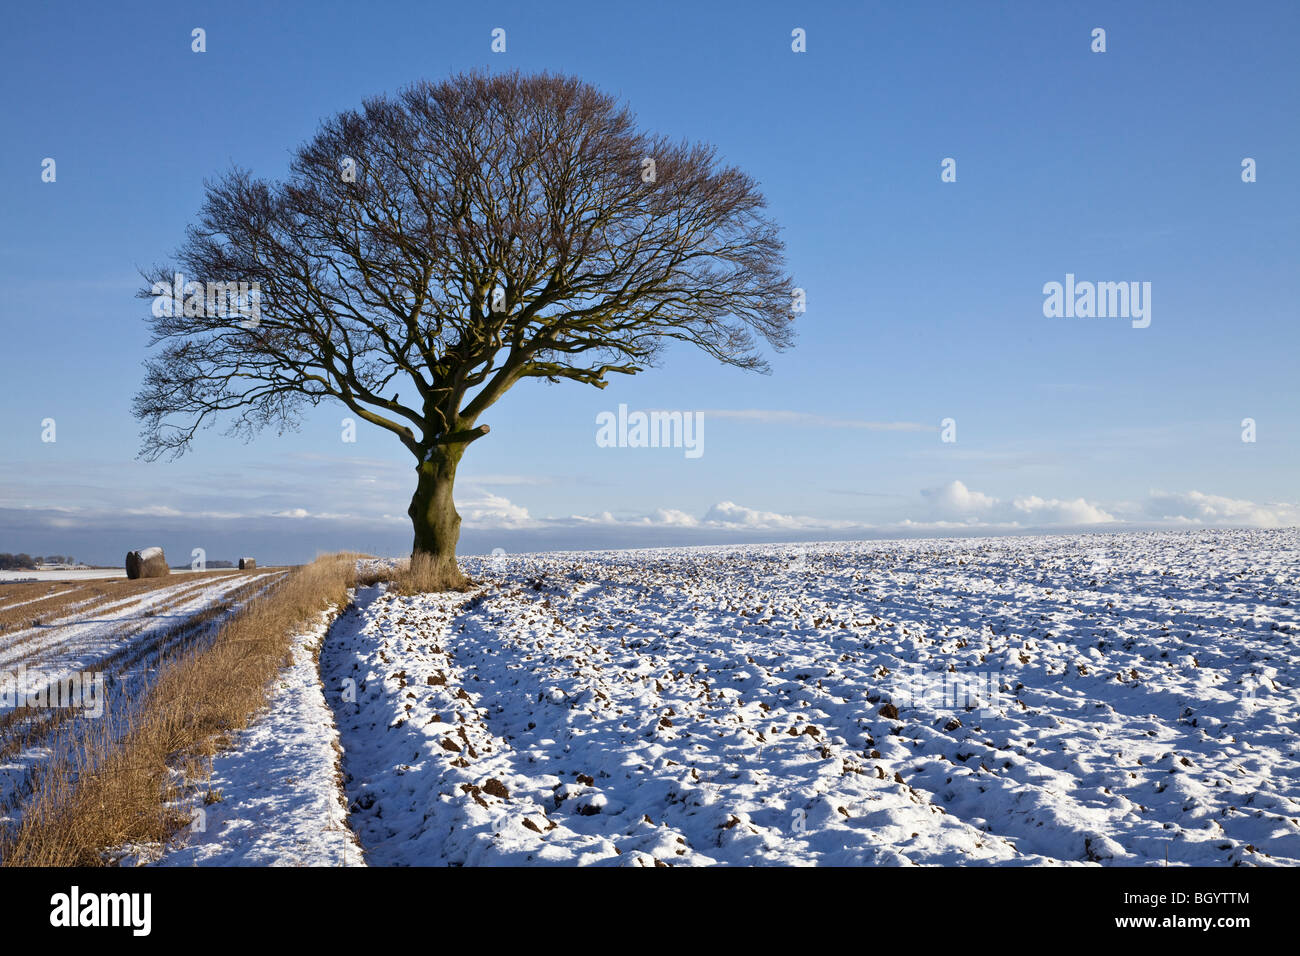 Snowy Yorkshire Wolds above Forden Yorkshire Wolds East Yorkshire Stock Photo